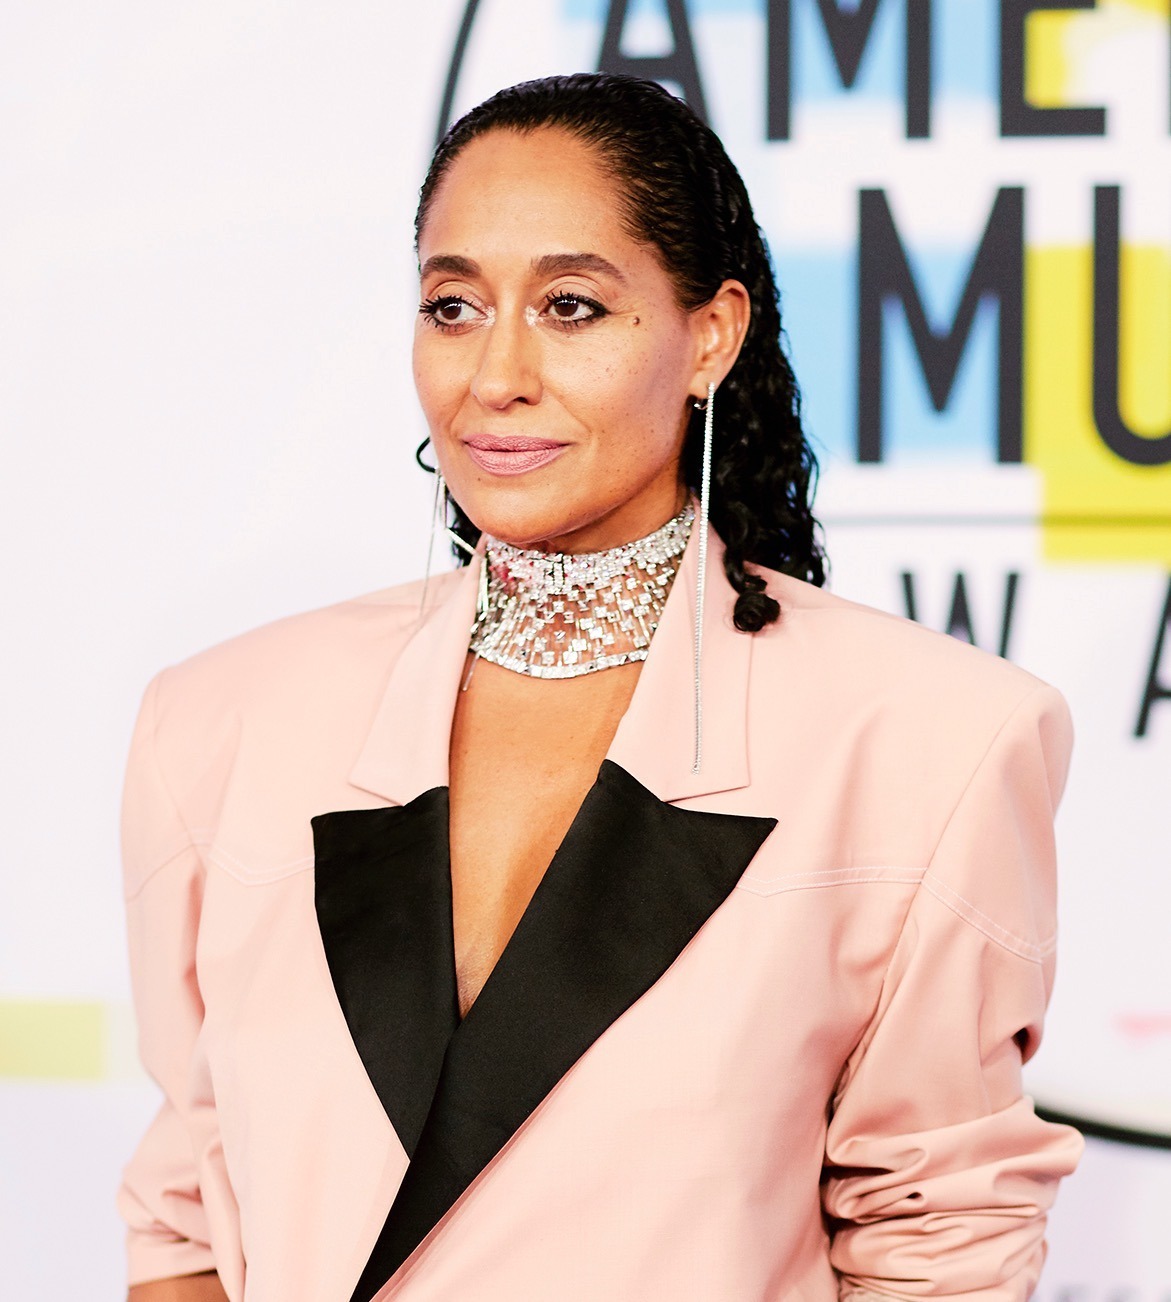 Tracee Ellis Ross Biography: Husband, Net Worth, Parents, Age, Siblings, Children, Movies, TV Shows, Height